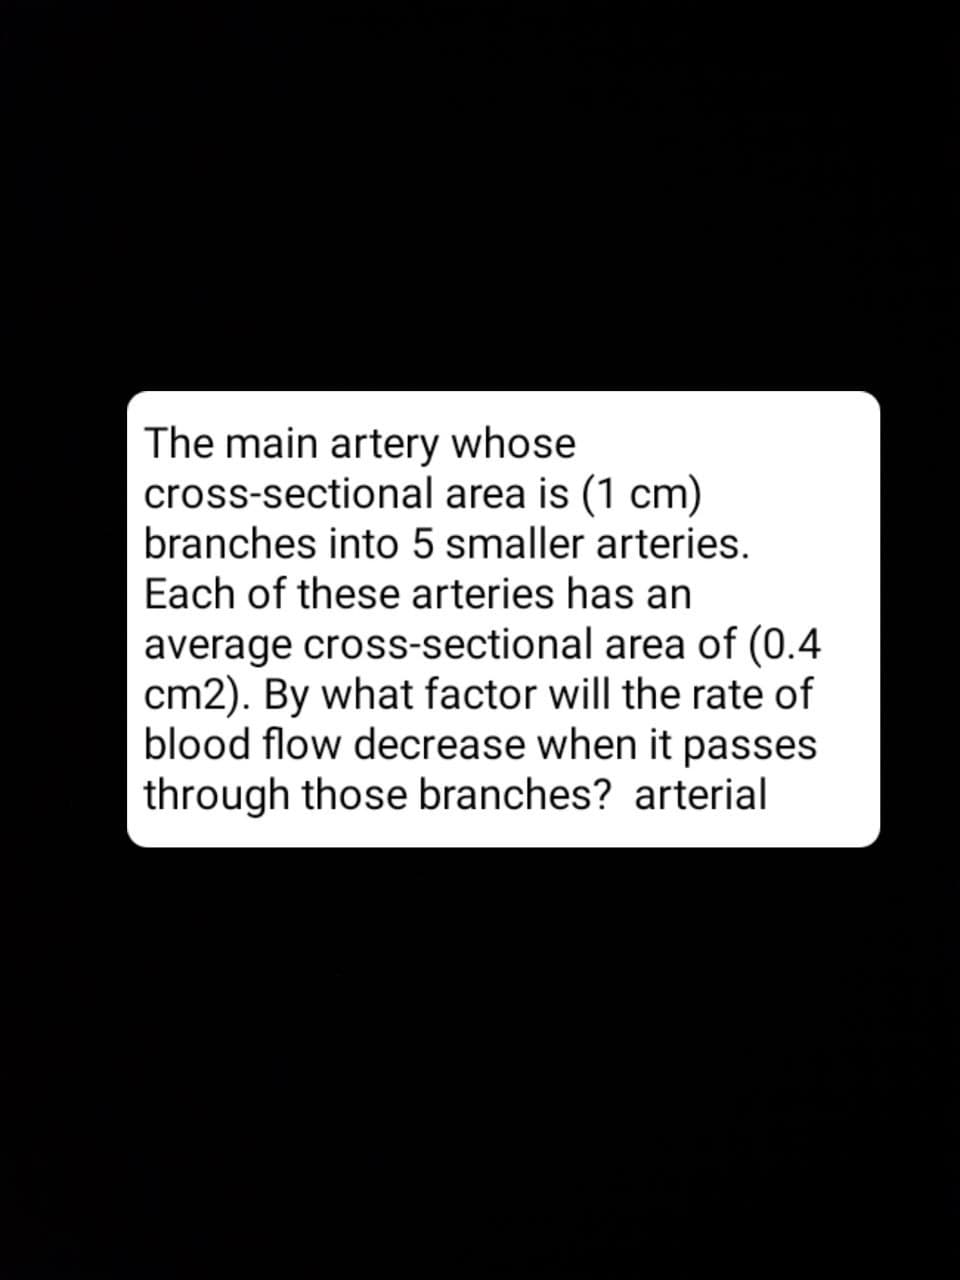 The main artery whose
cross-sectional area is (1 cm)
branches into 5 smaller arteries.
Each of these arteries has an
average cross-sectional area of (0.4
cm2). By what factor will the rate of
blood flow decrease when it passes
through those branches? arterial
